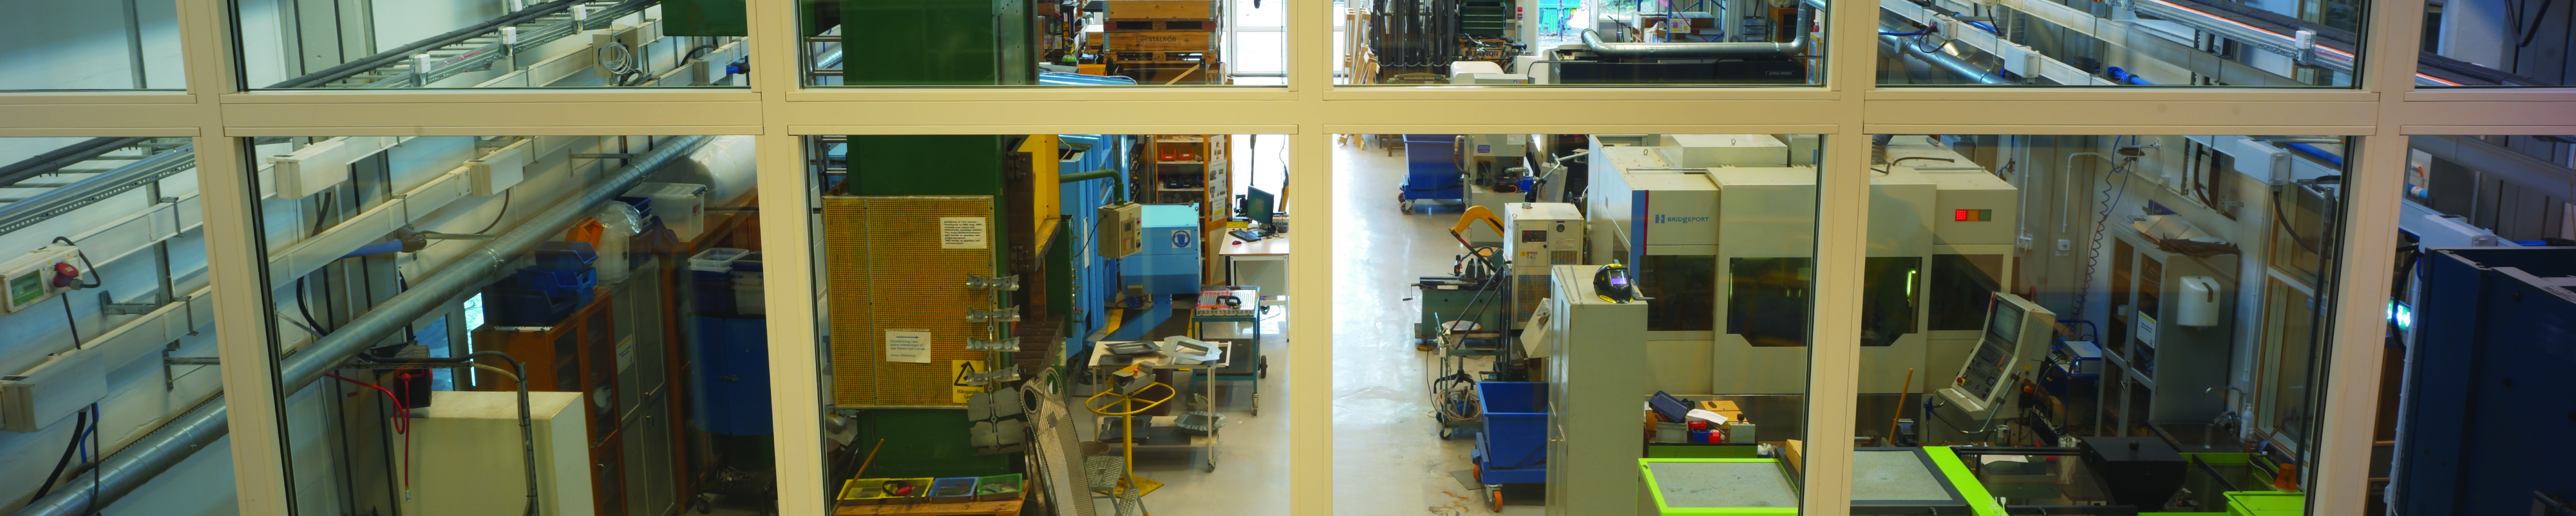 the view of the workshop. photo.